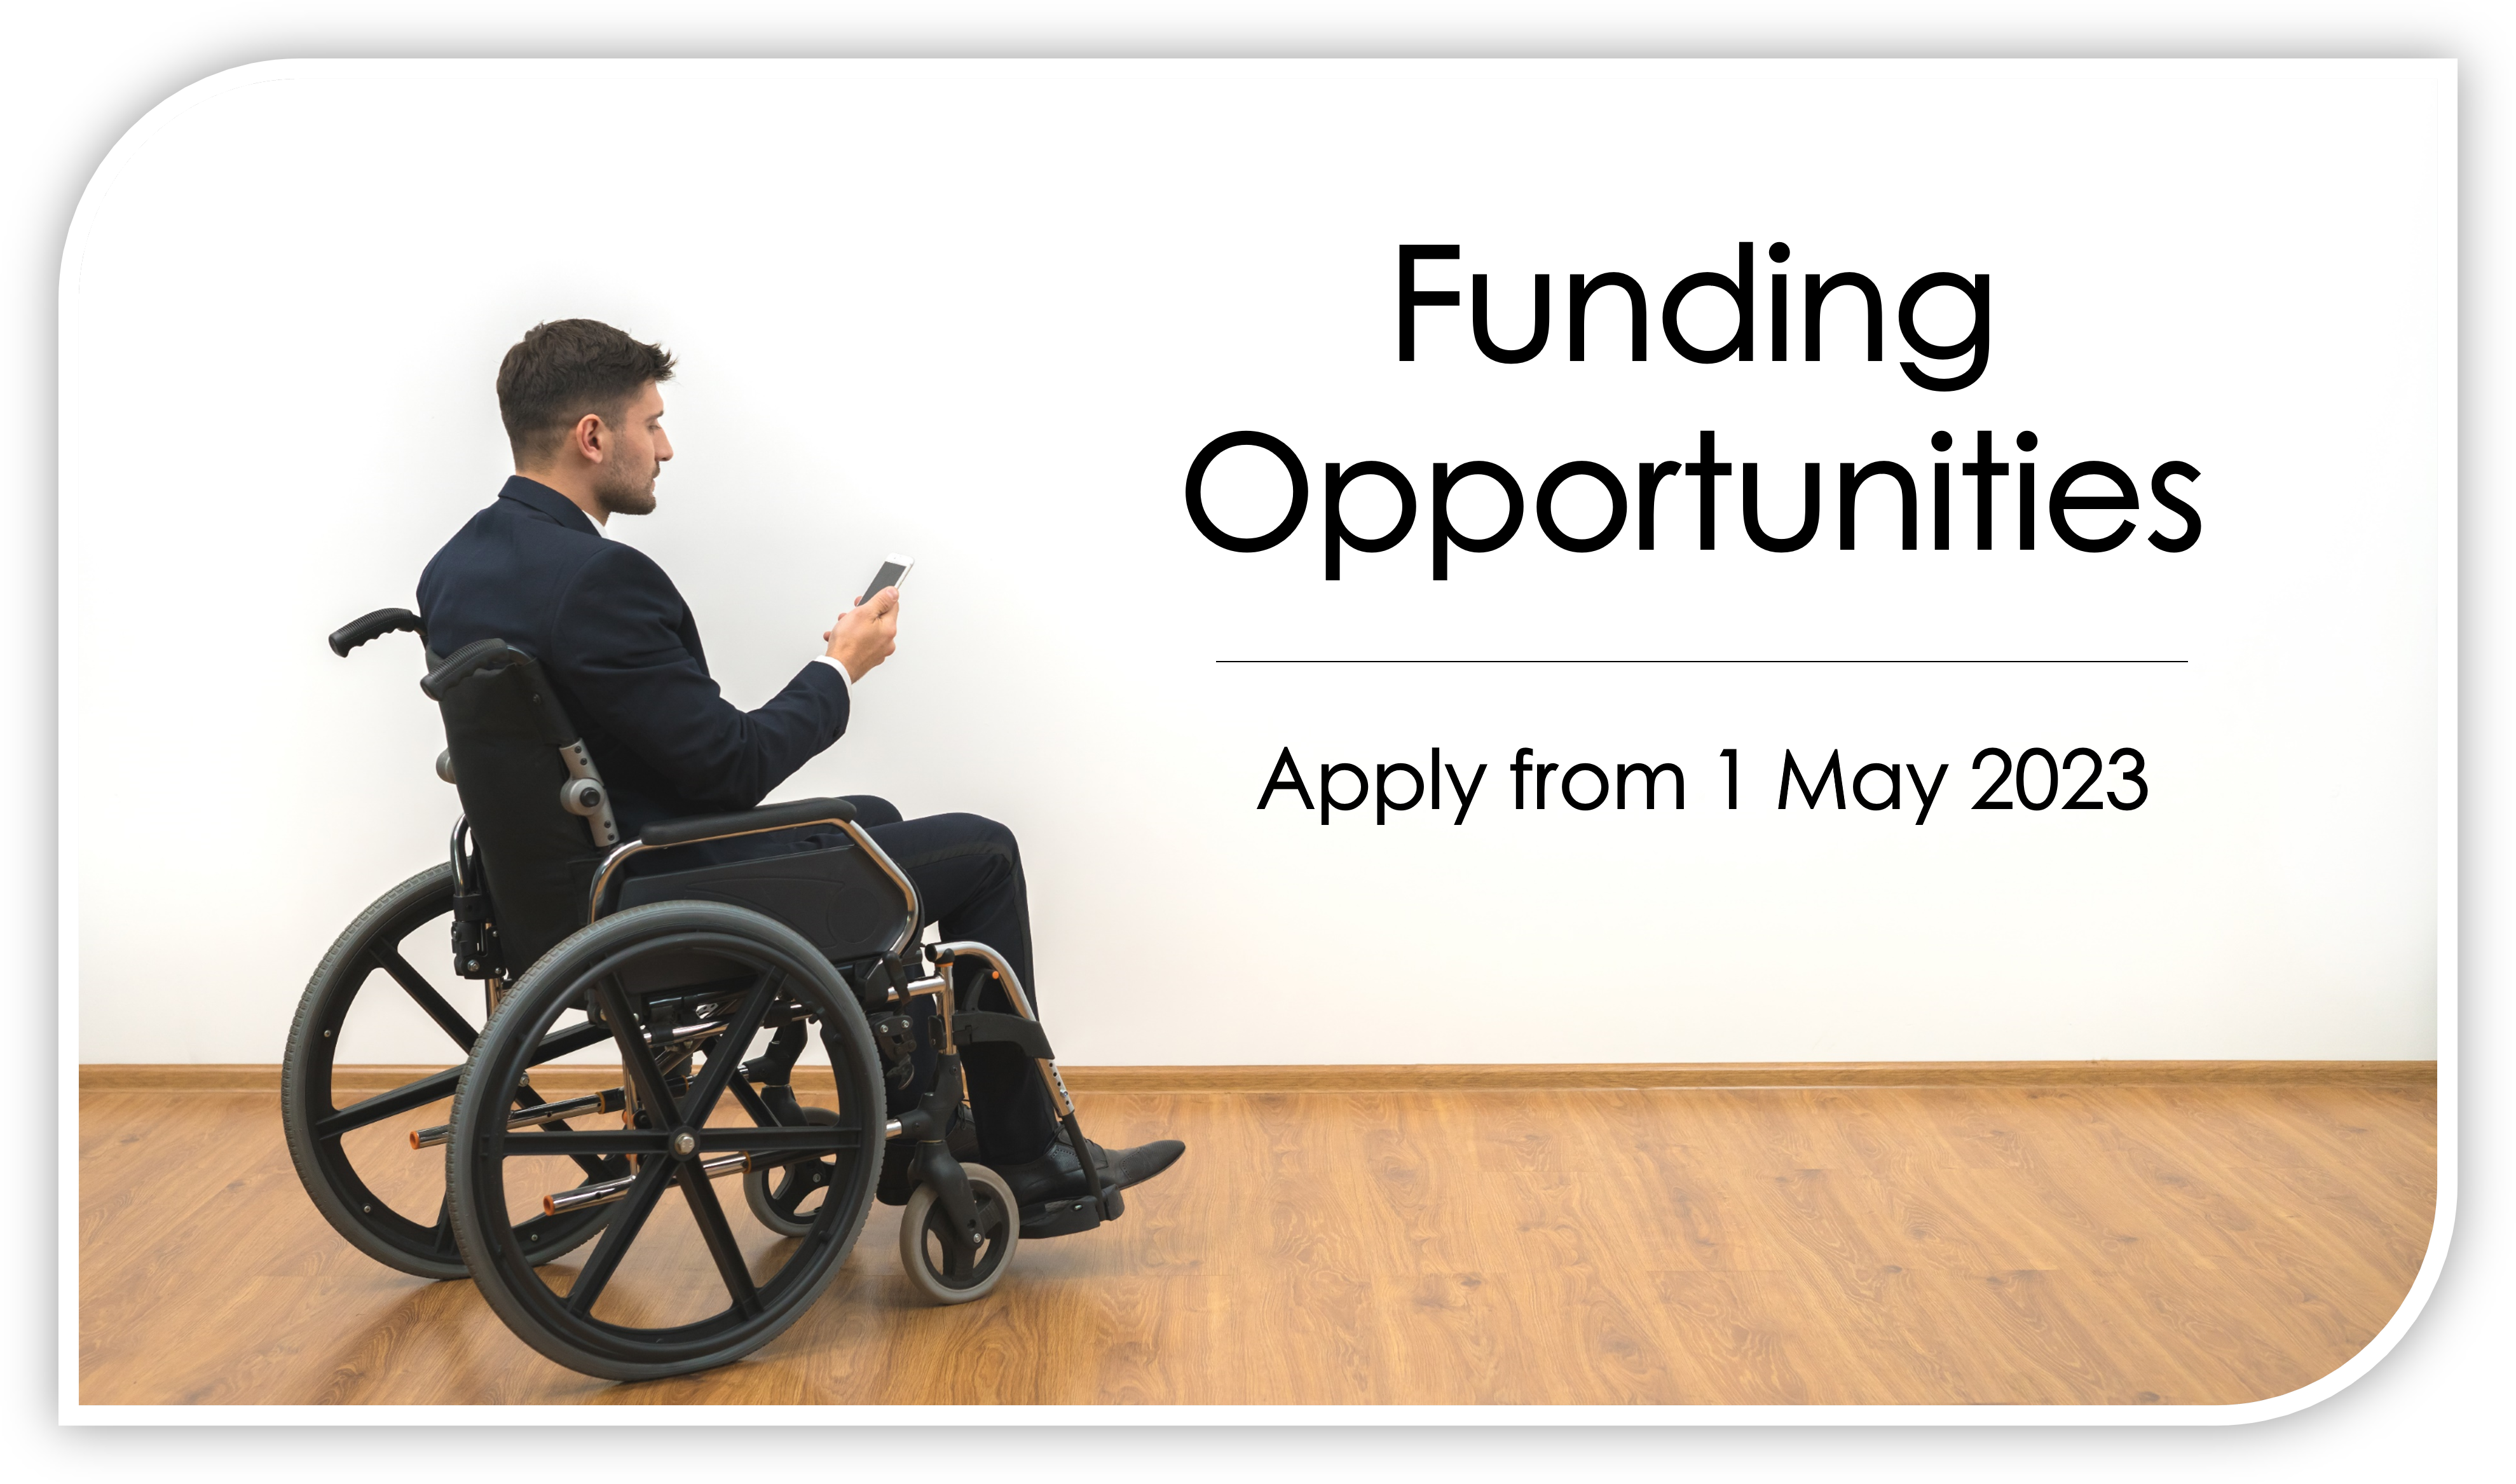 Person in wheelchair looking at a mobile telephone. Text states: Funding Opportunities. Apply from 1 May 2023.